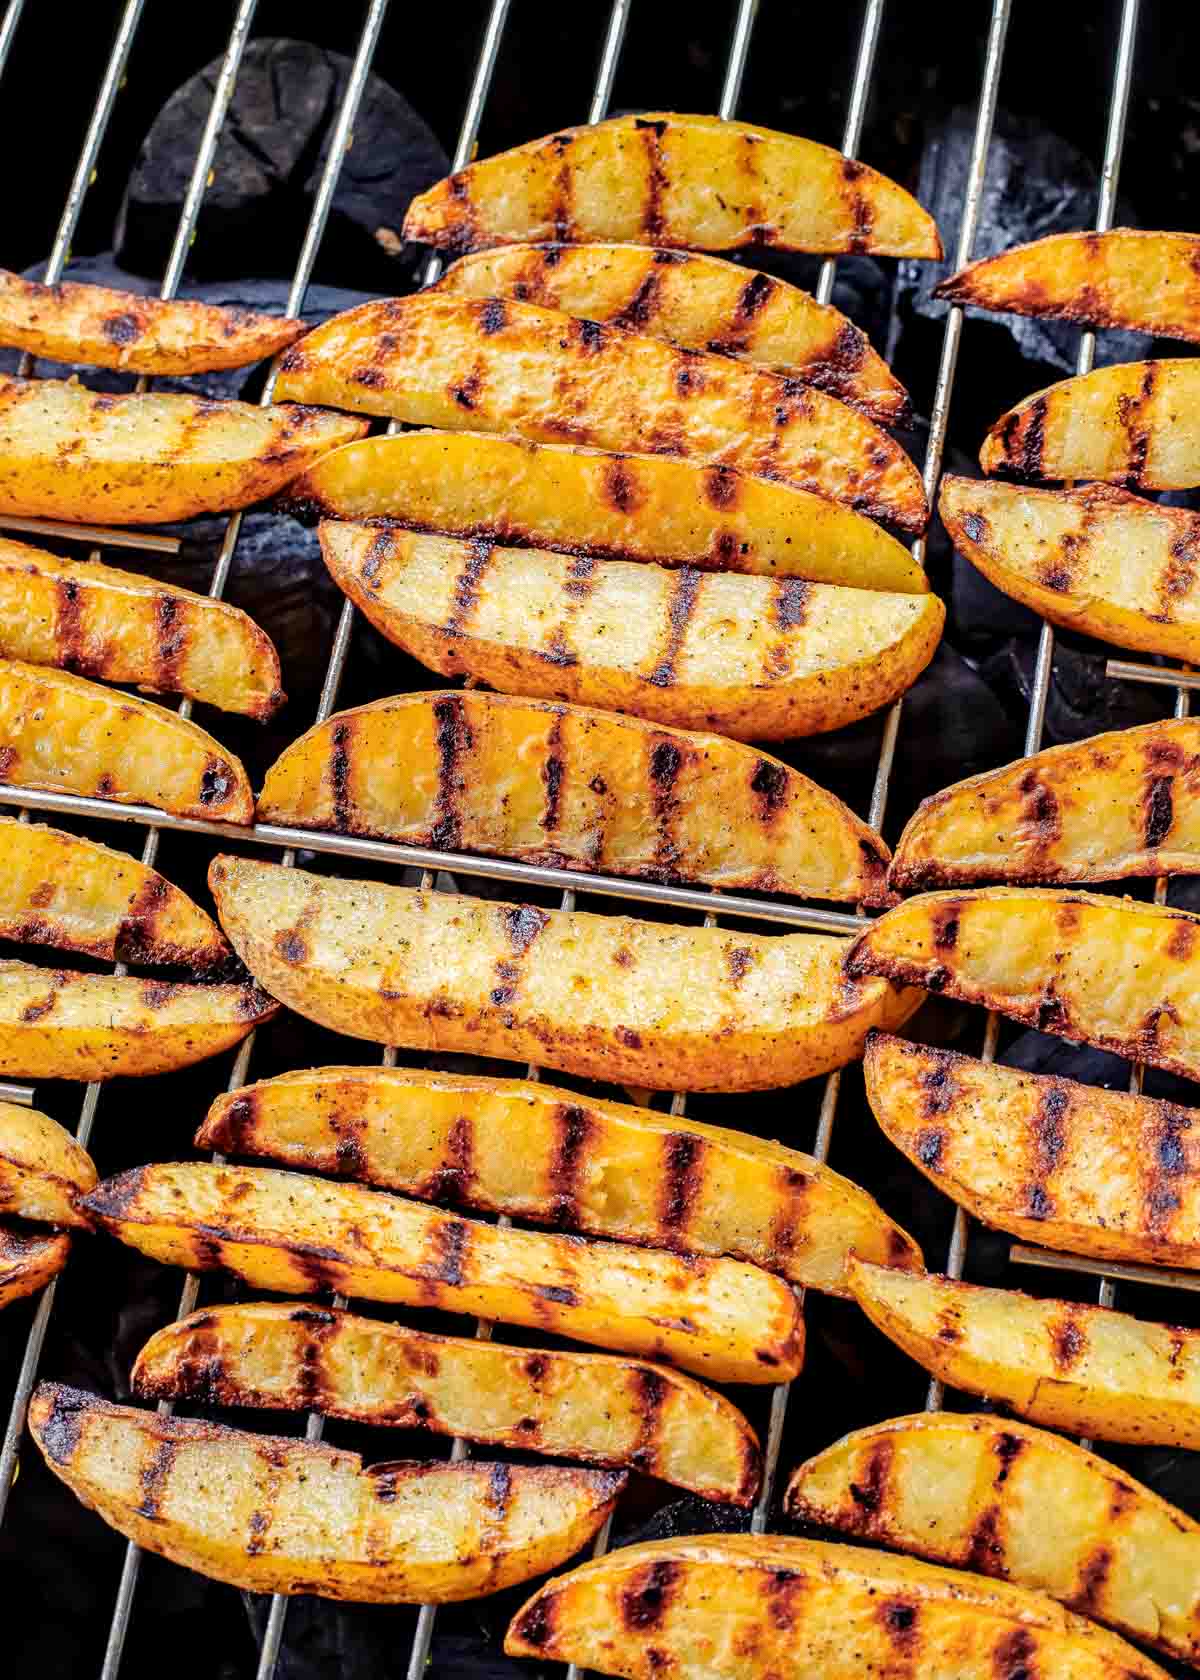 Grilled potato wedges on grill grates.